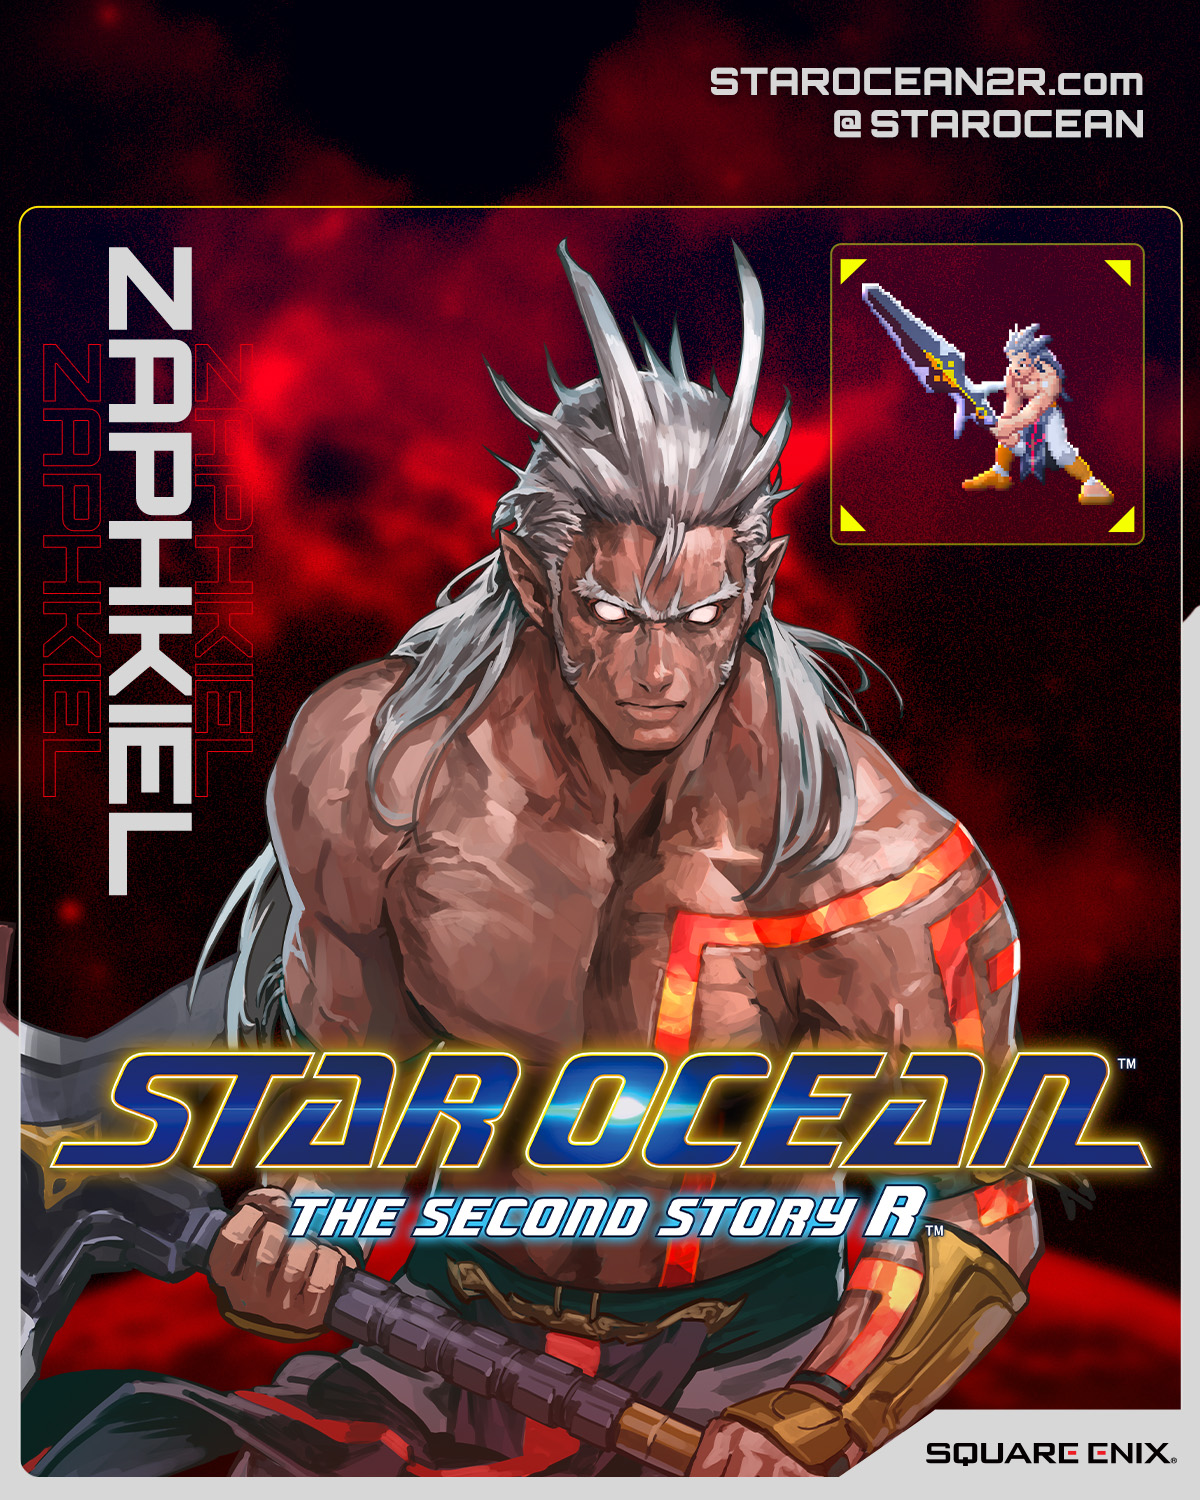 Star Ocean: The Second Story R Introduces One of the Ten Wise Men, Antagonist Zaphkiel